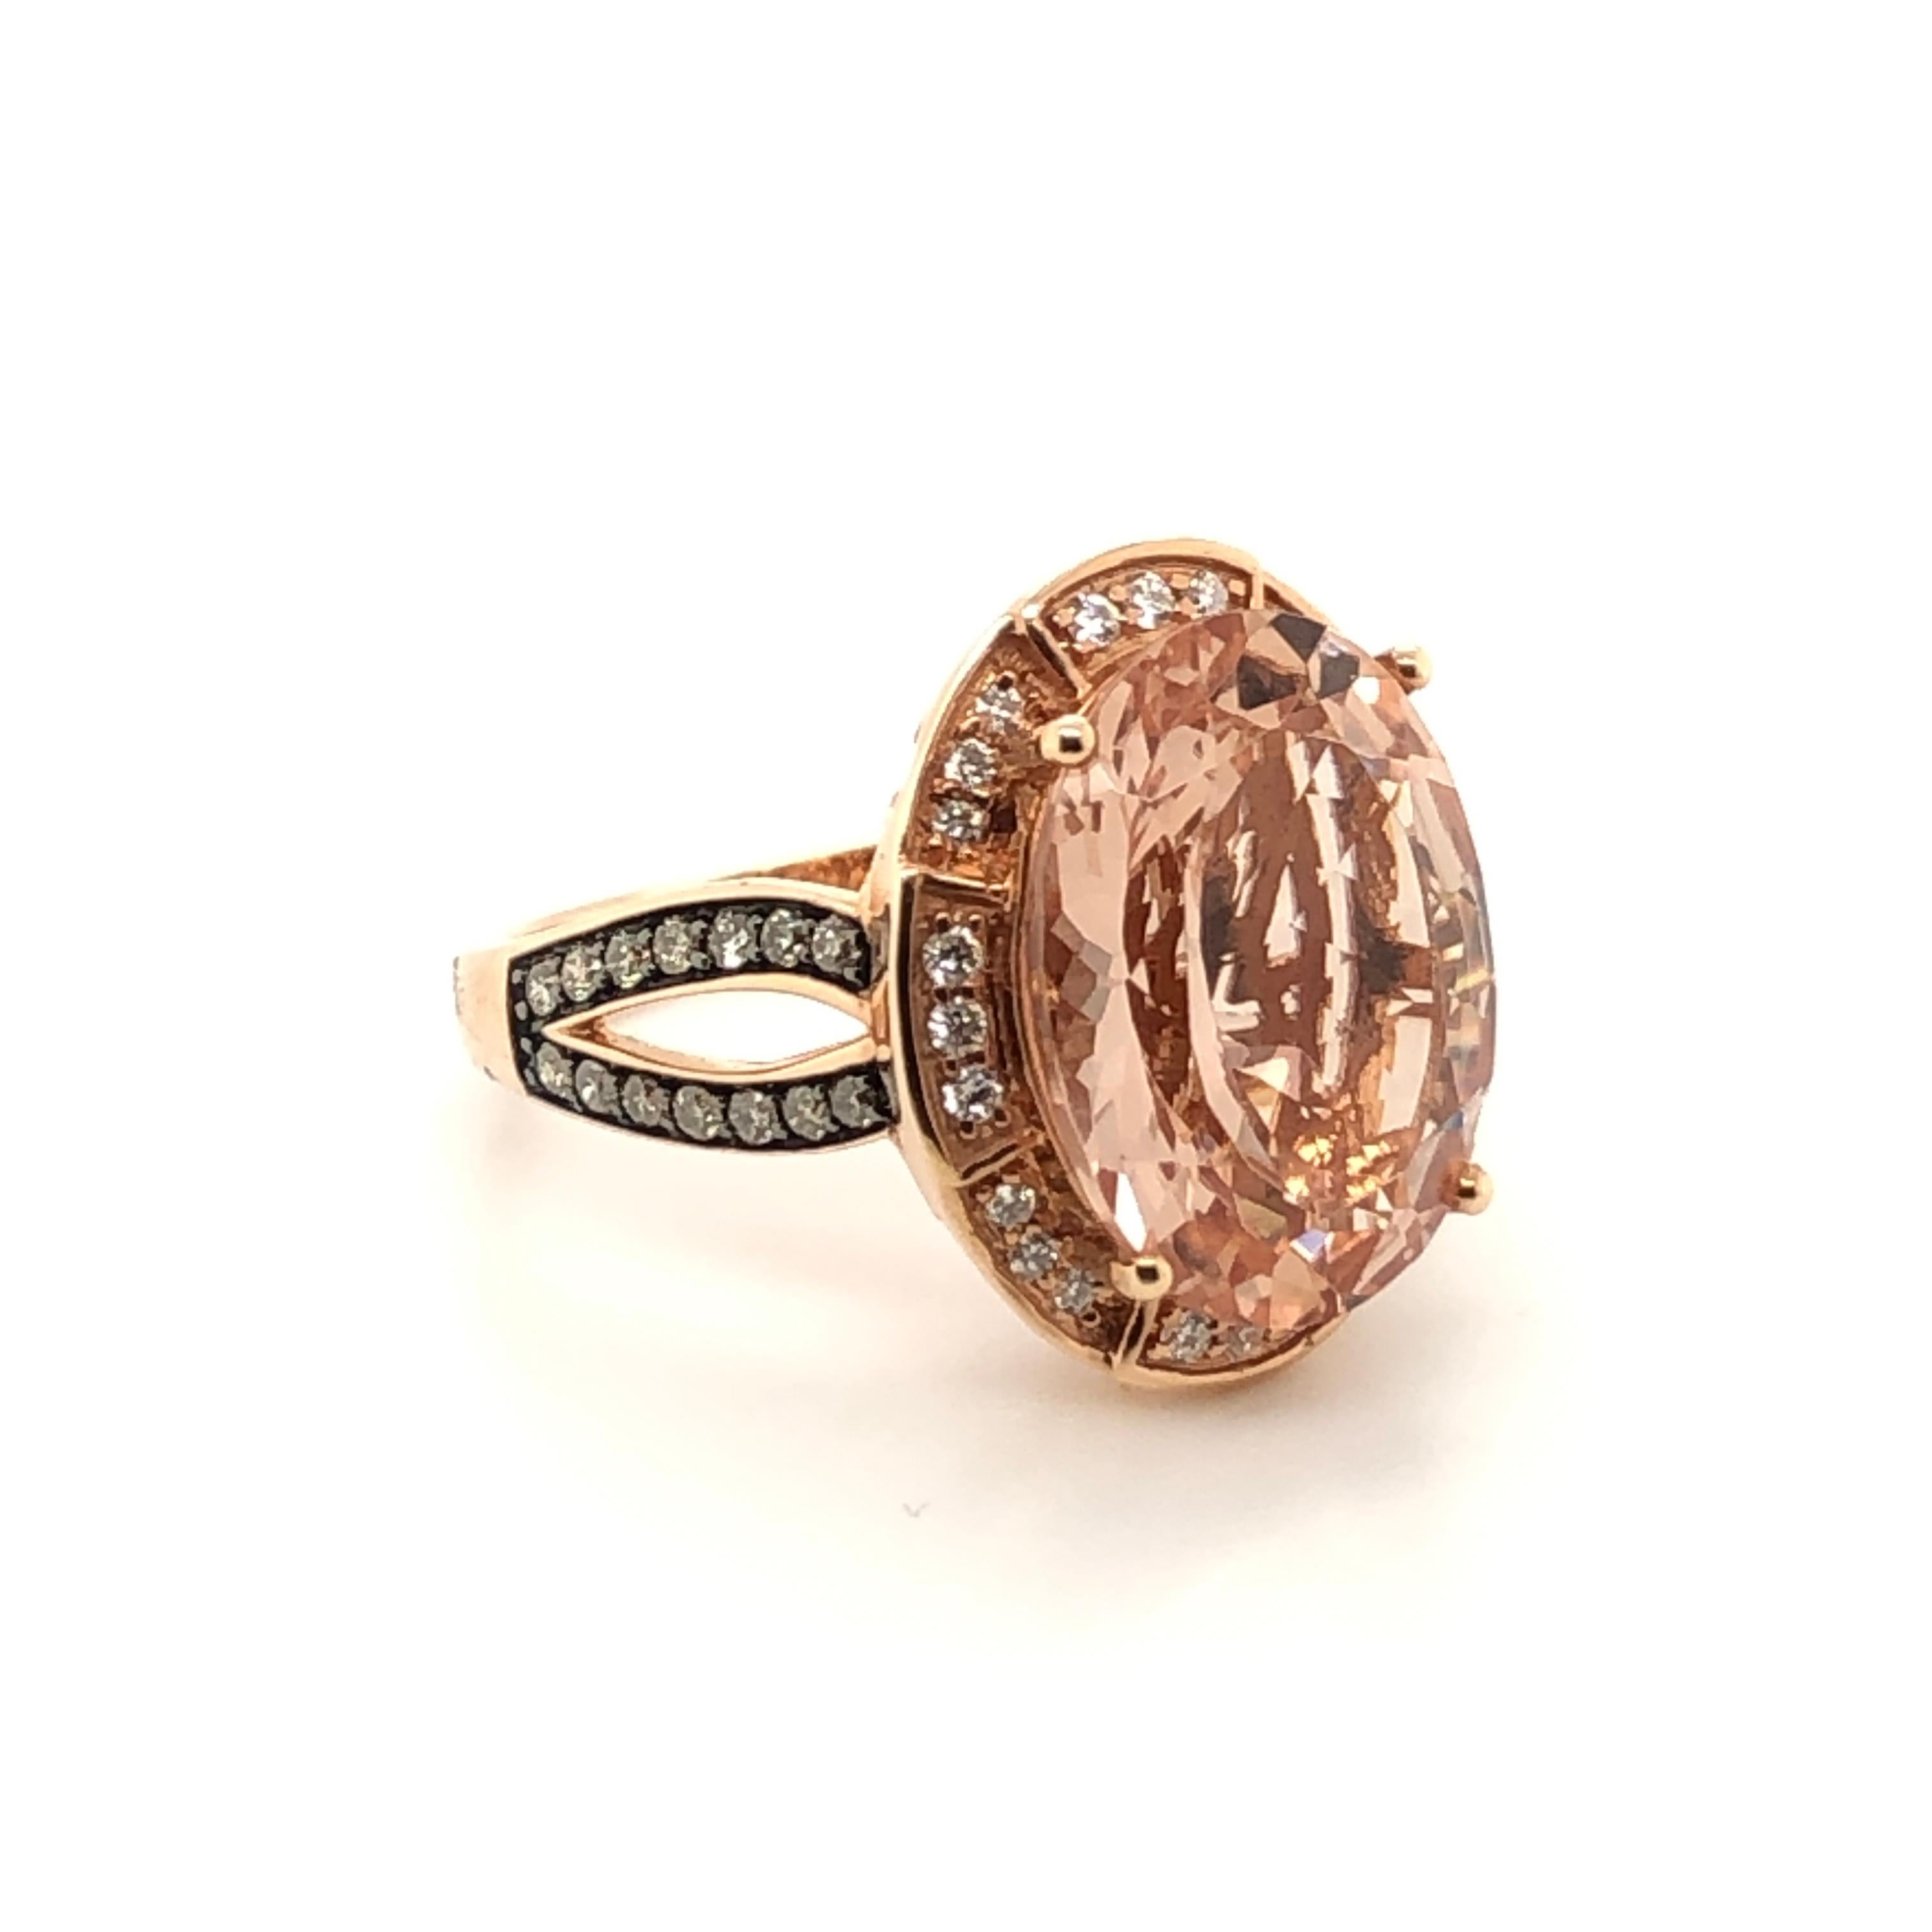 Blushing with flavor, this 14K Strawberry Gold ring from Le Vian Chocolatier features a 6 -7/8 carat oval Peach Morganite deliciously accented with 1/4 ct t.w. Chocolate Diamonds and  1/5 ct t.w. Vanilla Diamonds.

Ring Size: 7.25

Le Vian 7 Carat